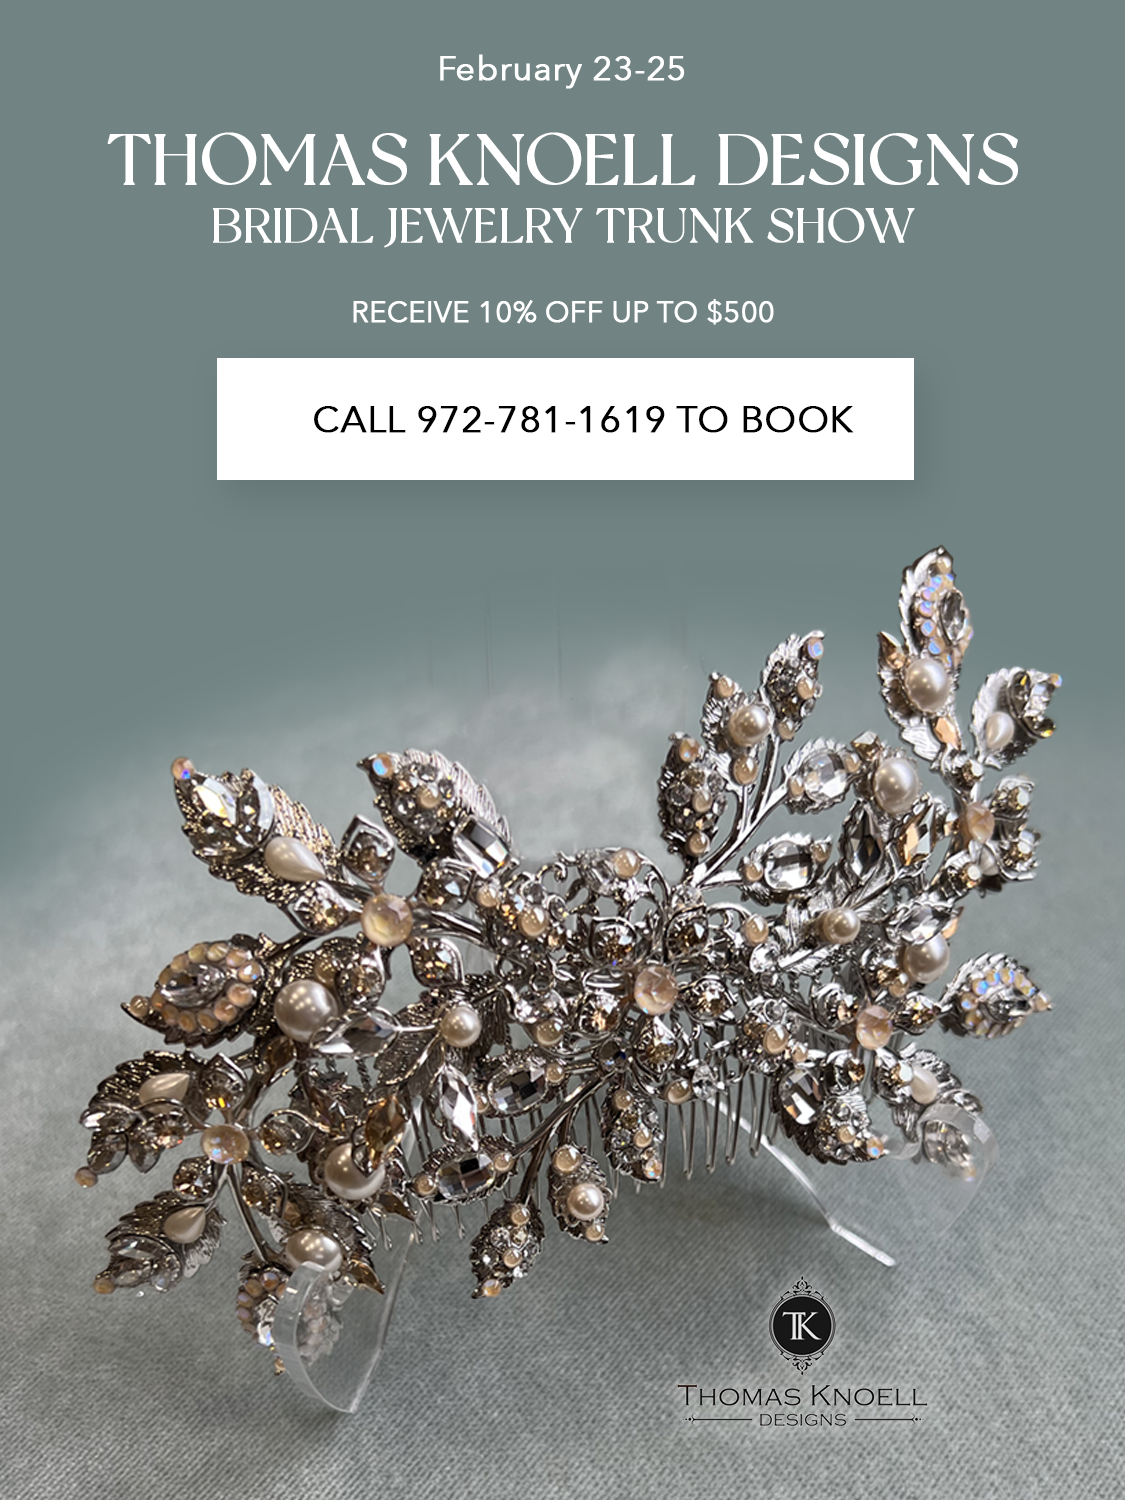 Thomas Knoell Bridal Jewelry Trunk Show